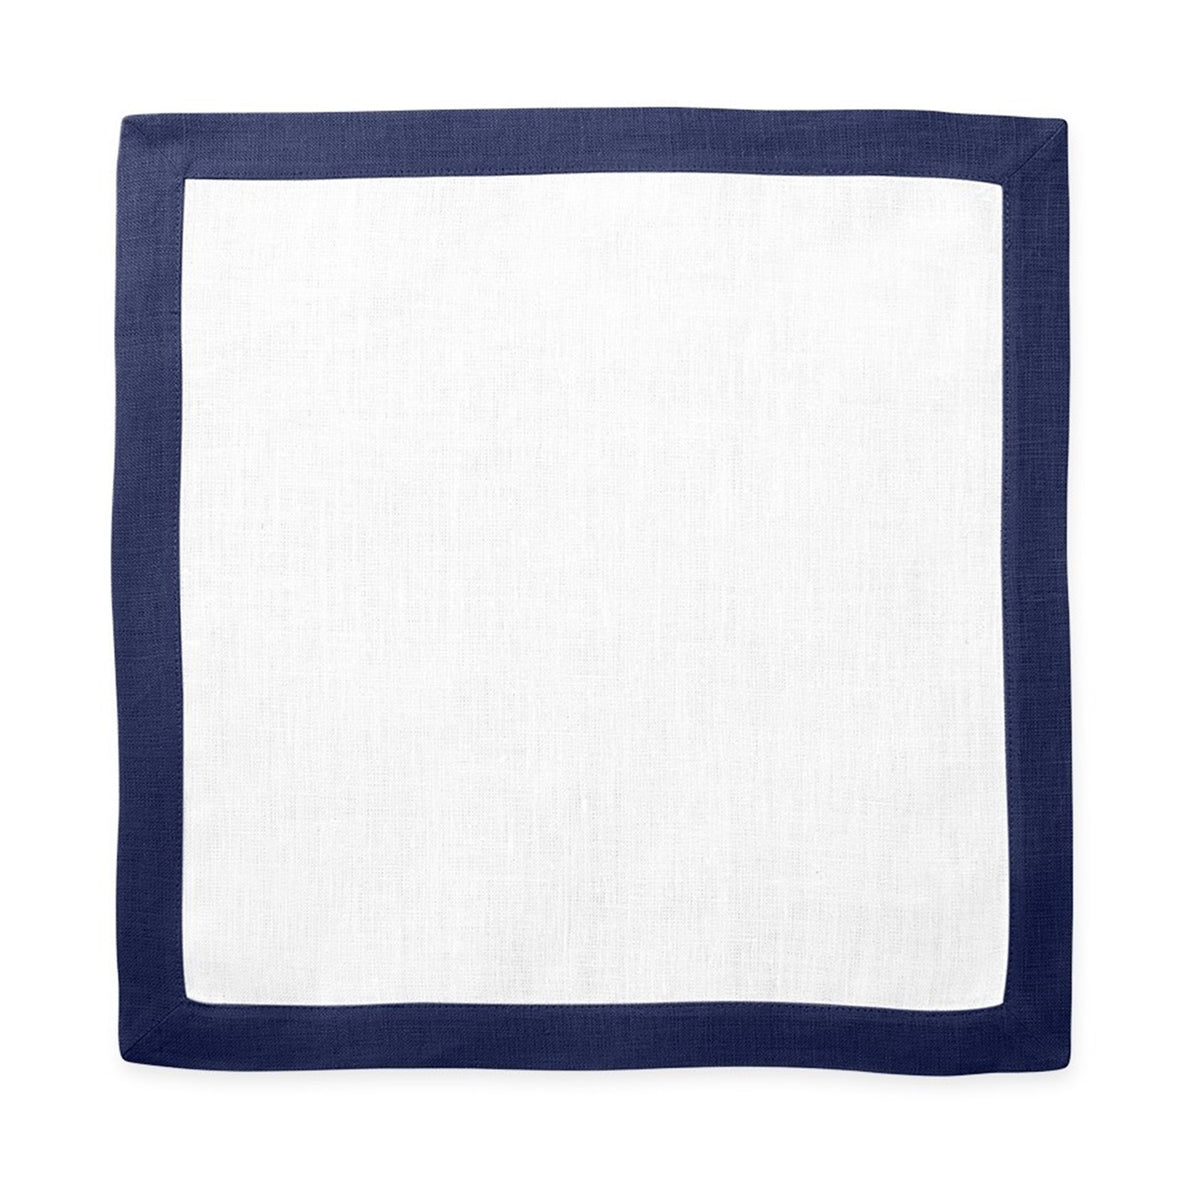 Silo Image of Matouk Border Placemat in Color Sapphire